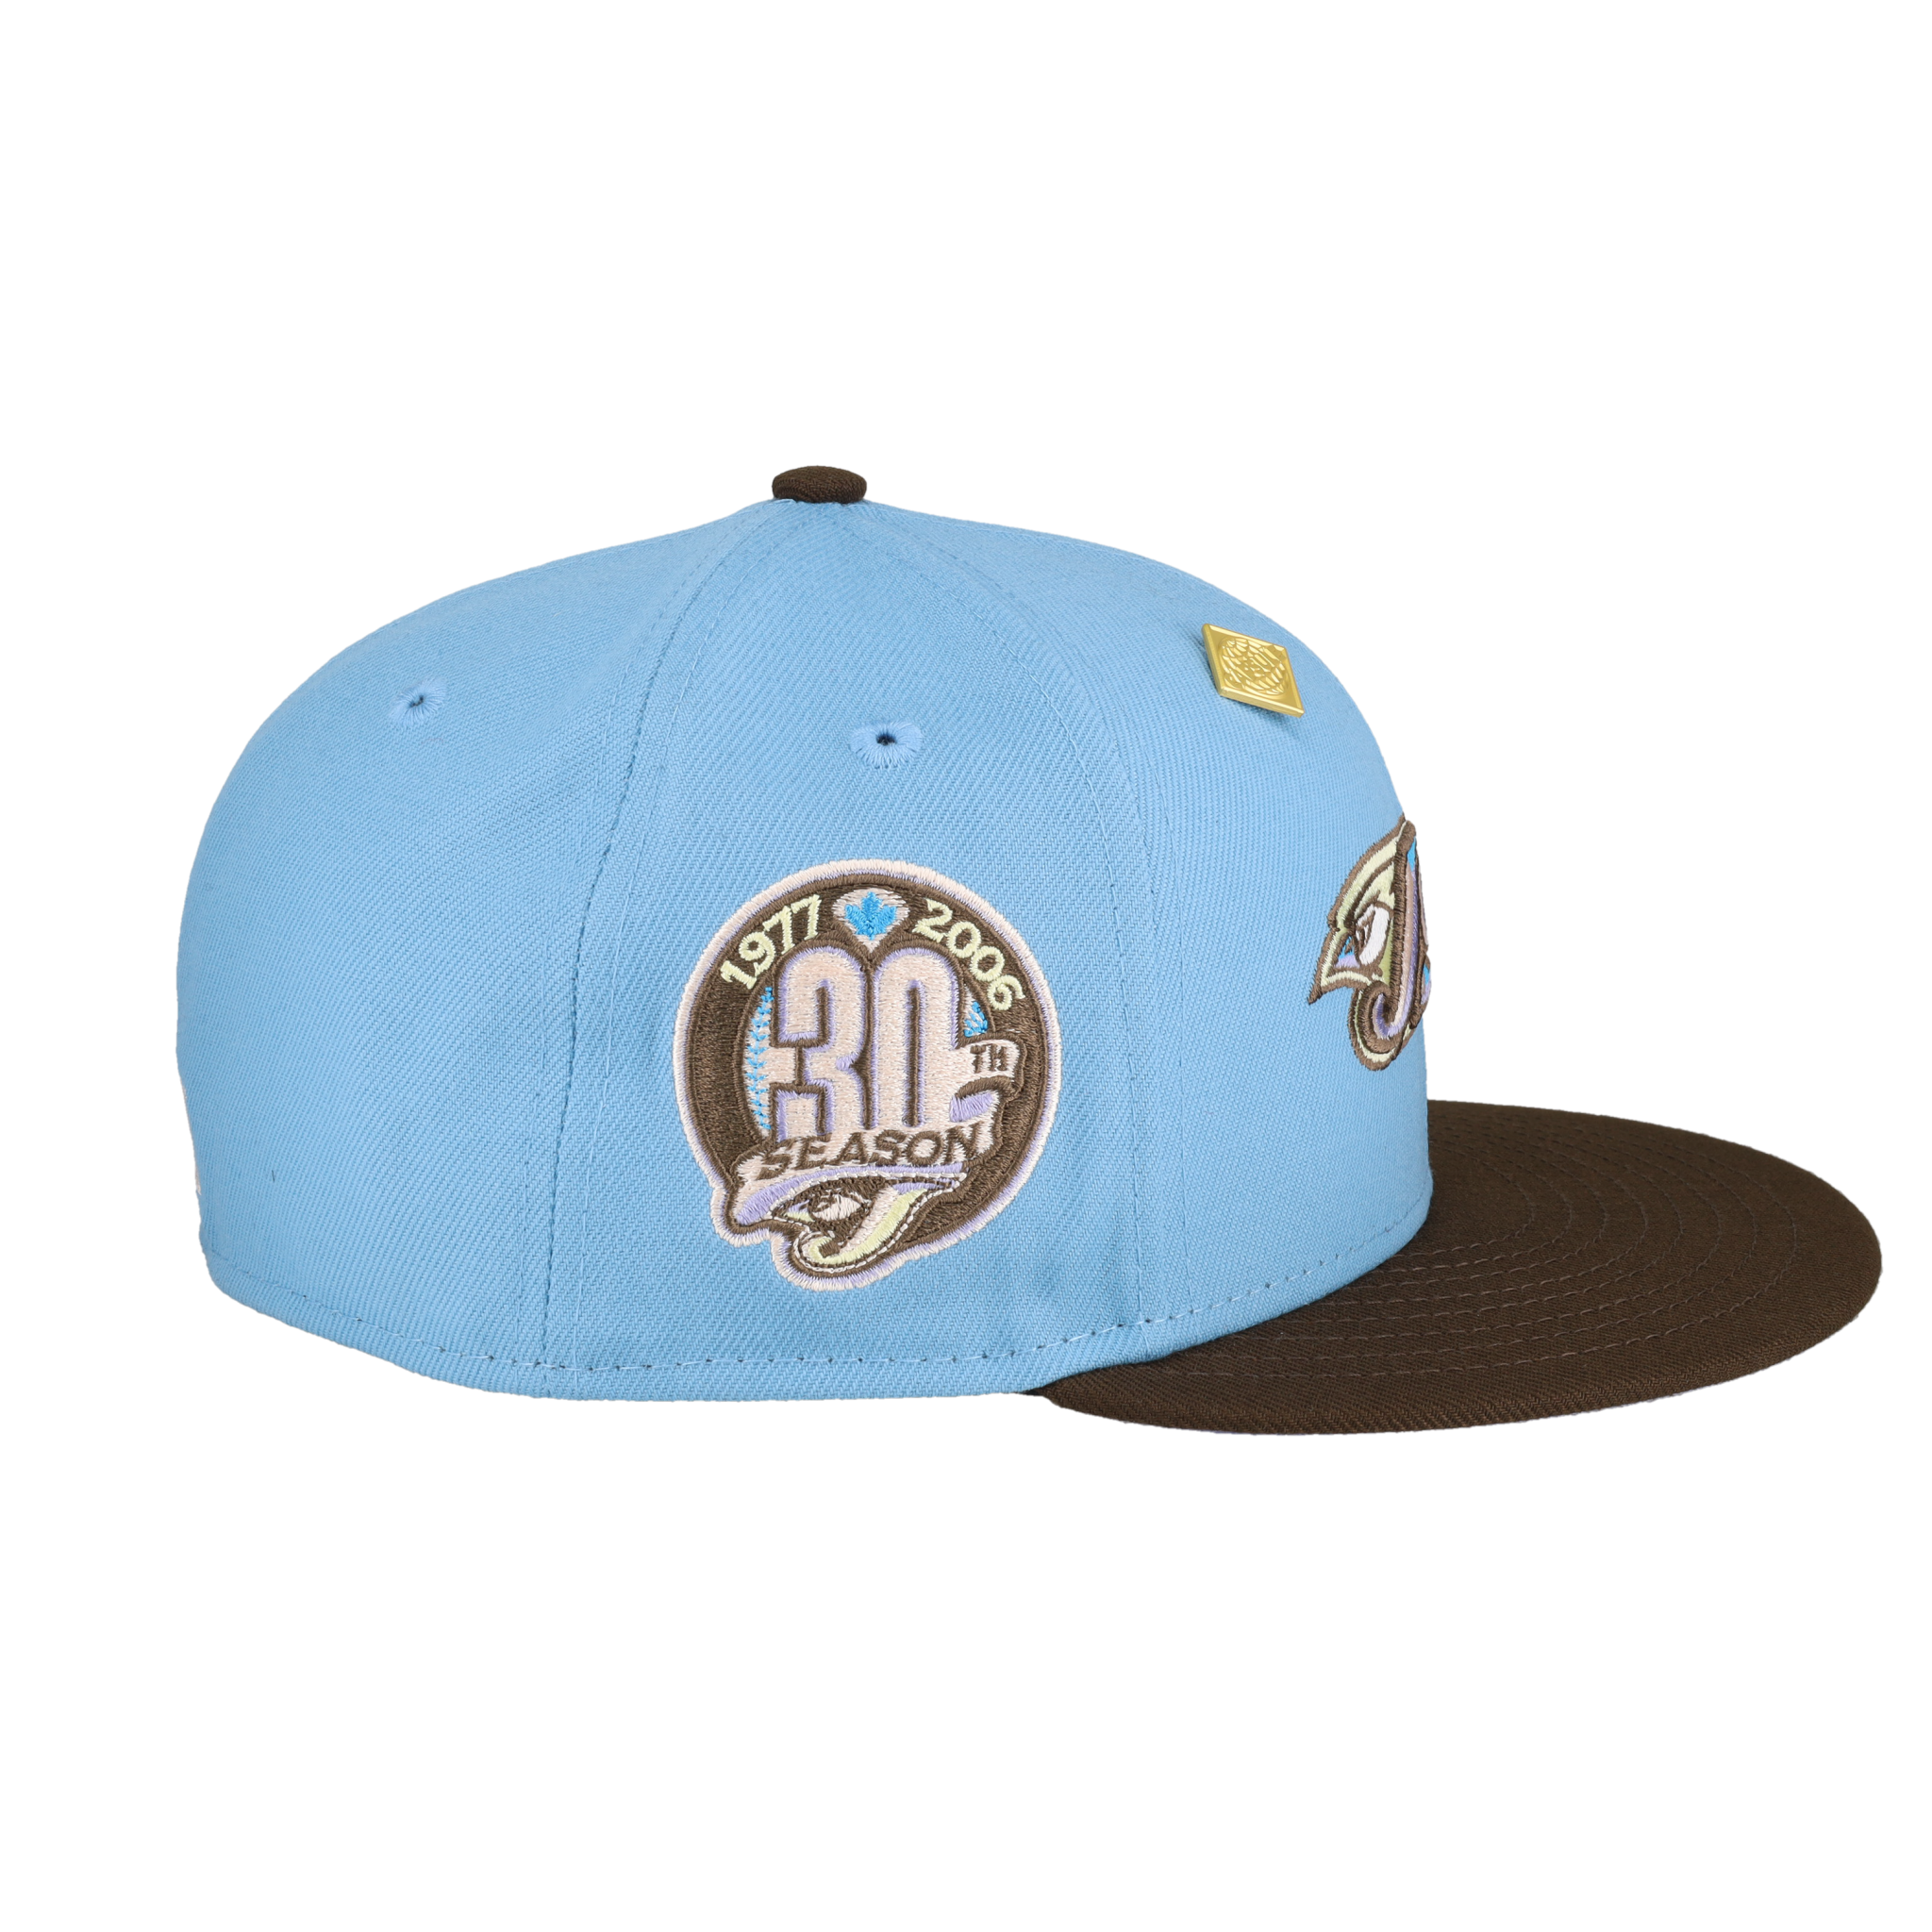 New Era Toronto Blue Jays 30th Season Cream Dome Prime Edition 59Fifty  Fitted Hat, EXCLUSIVE HATS, CAPS